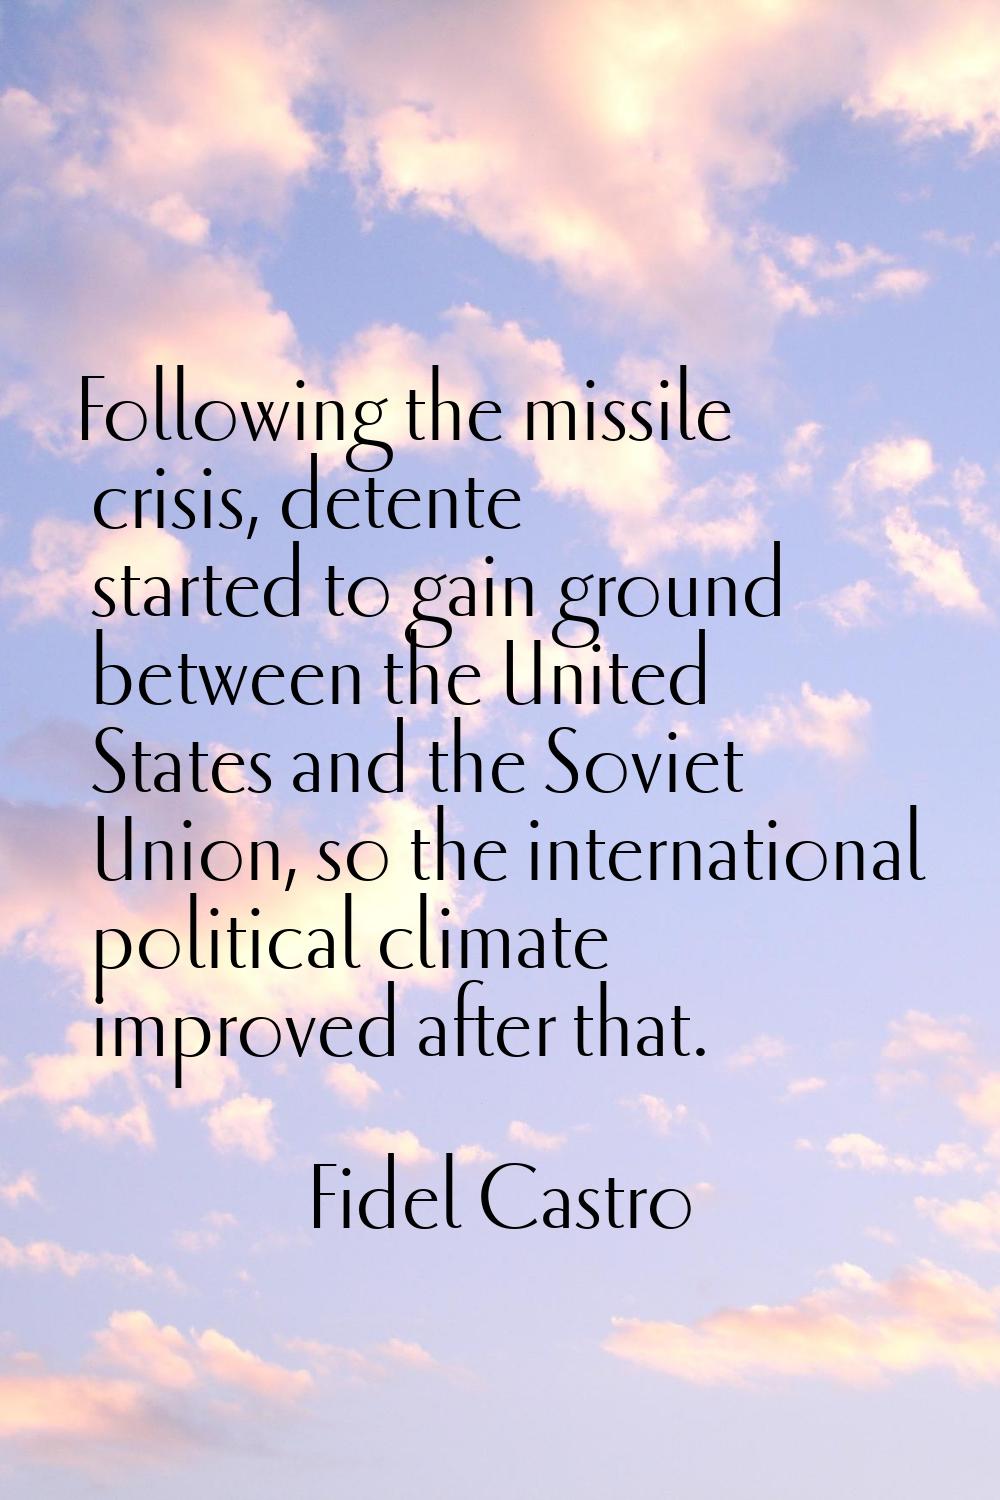 Following the missile crisis, detente started to gain ground between the United States and the Sovi